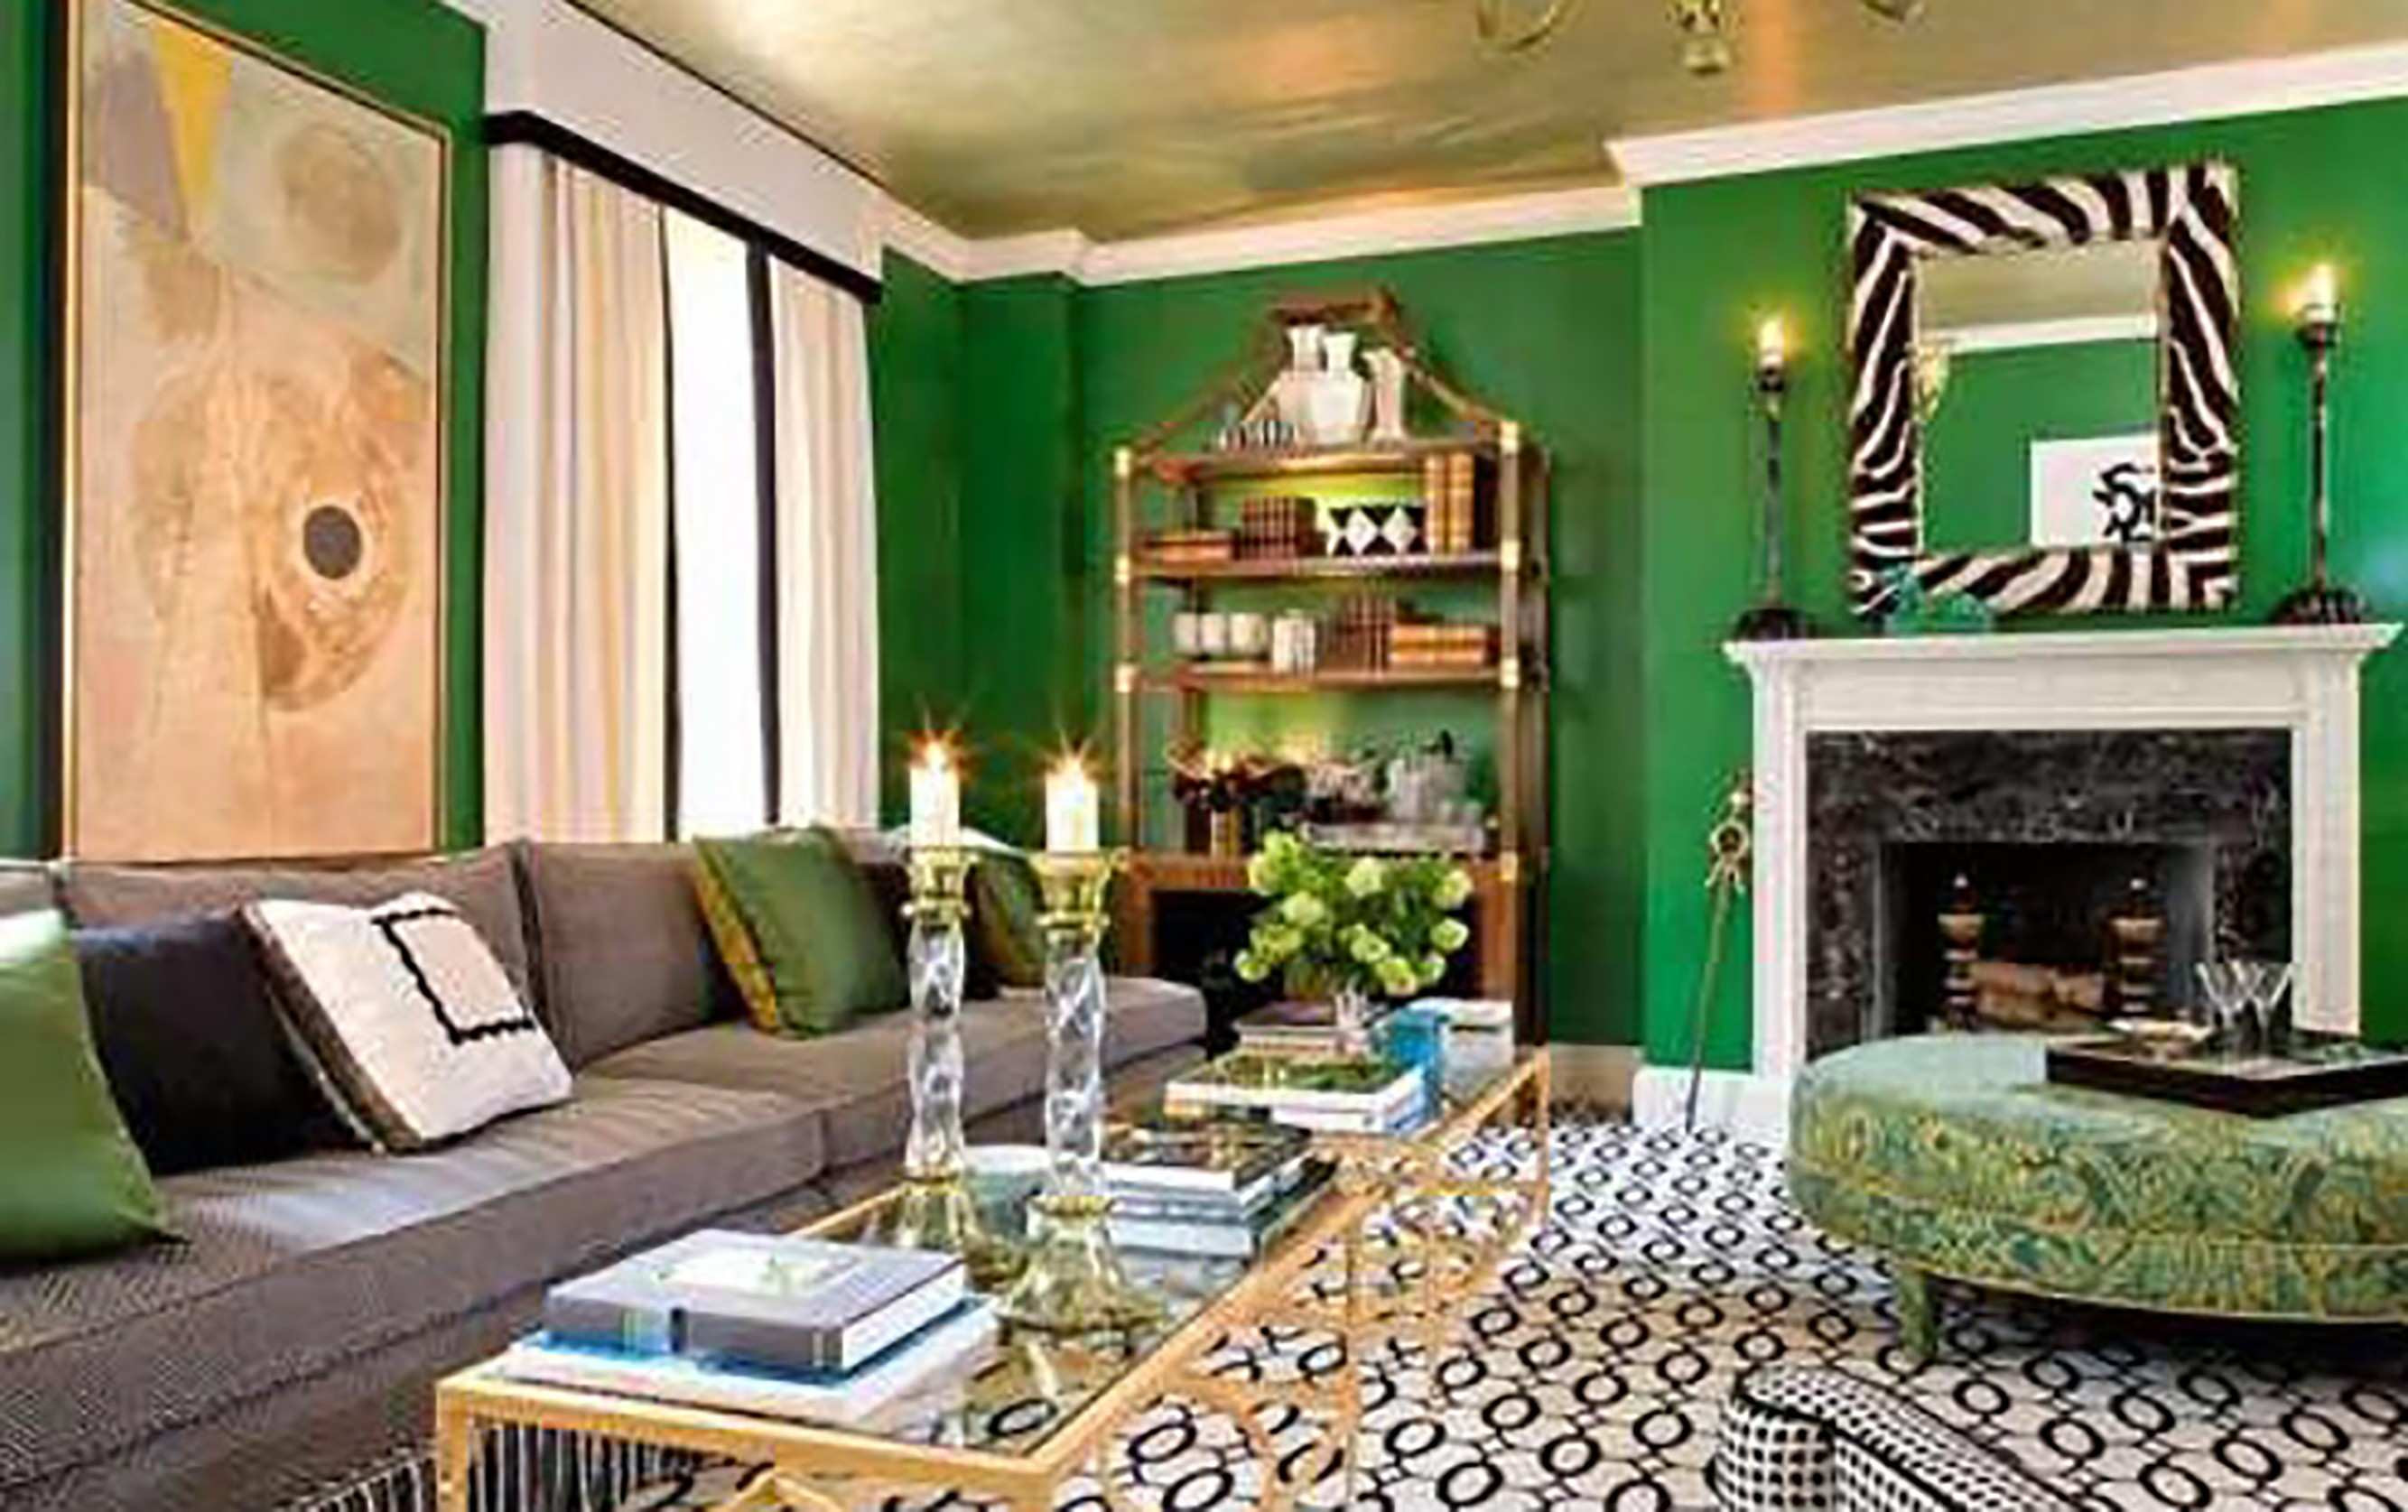 30 Cute Living Room Vase with Sticks 2024 free download living room vase with sticks of decorating ideas for living rooms with green walls inspirational big within decorating ideas for living rooms with green walls luxury cherished gold how to de